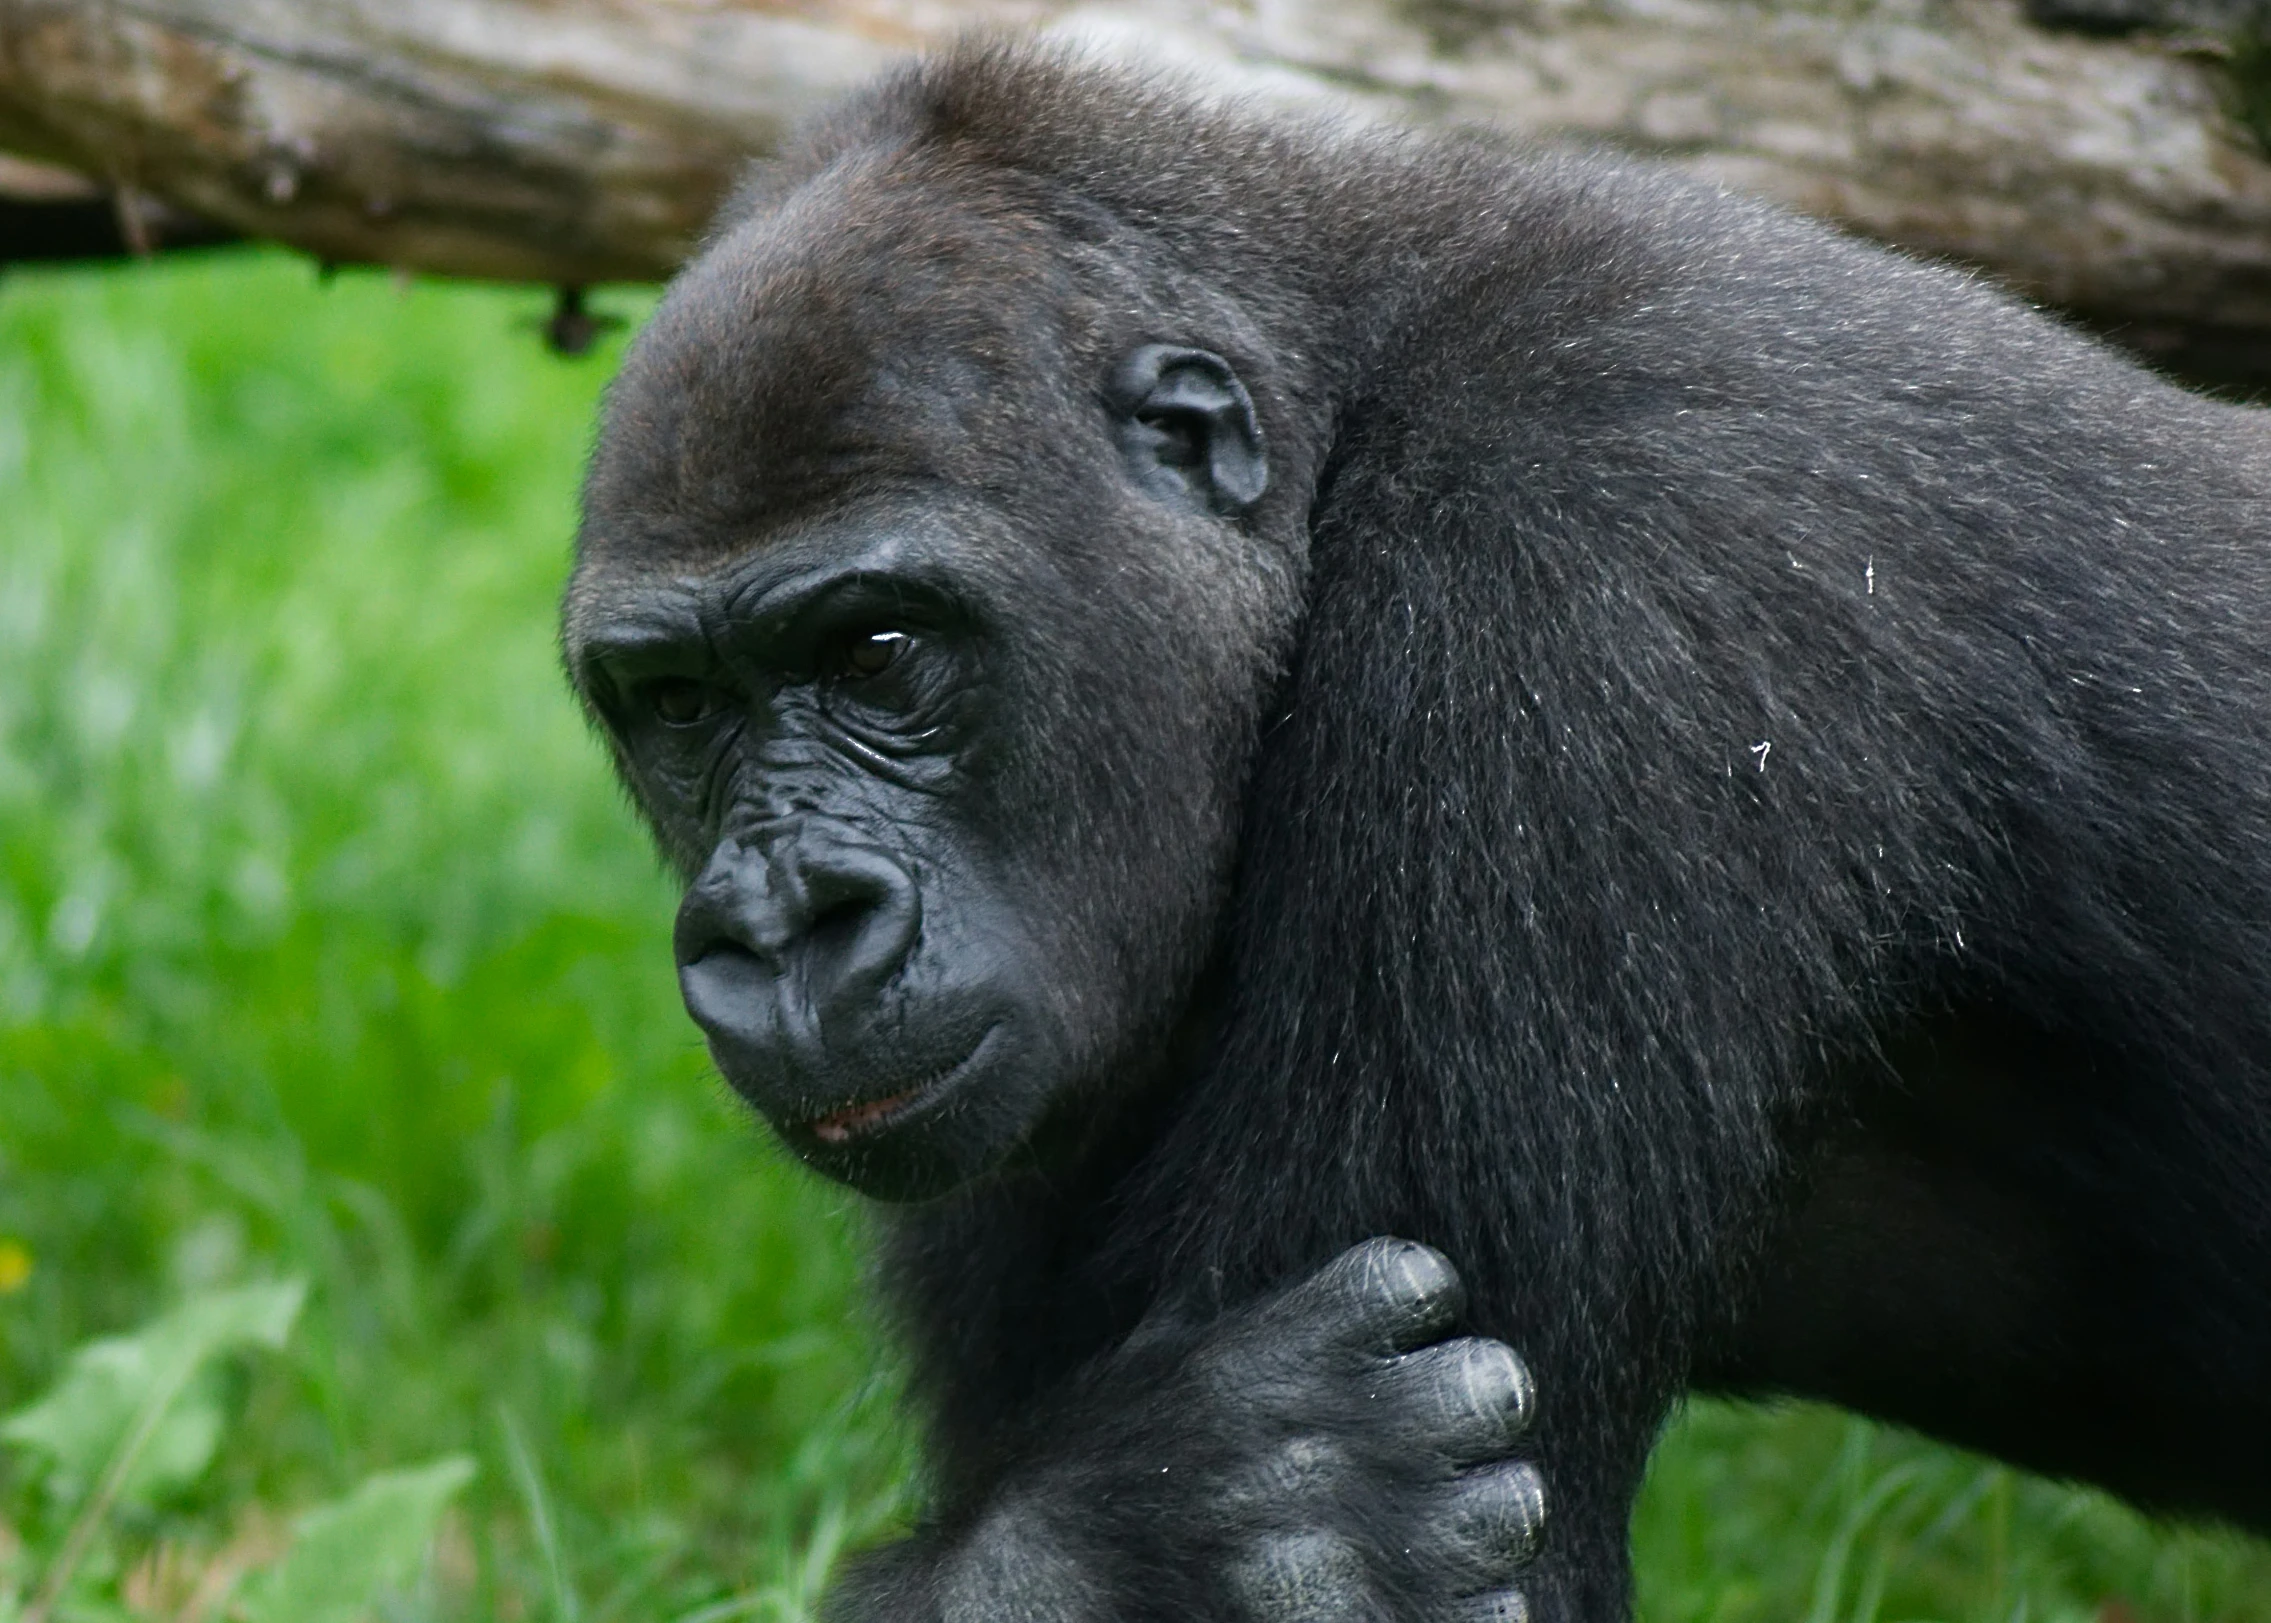 a black gorilla that is standing in some grass